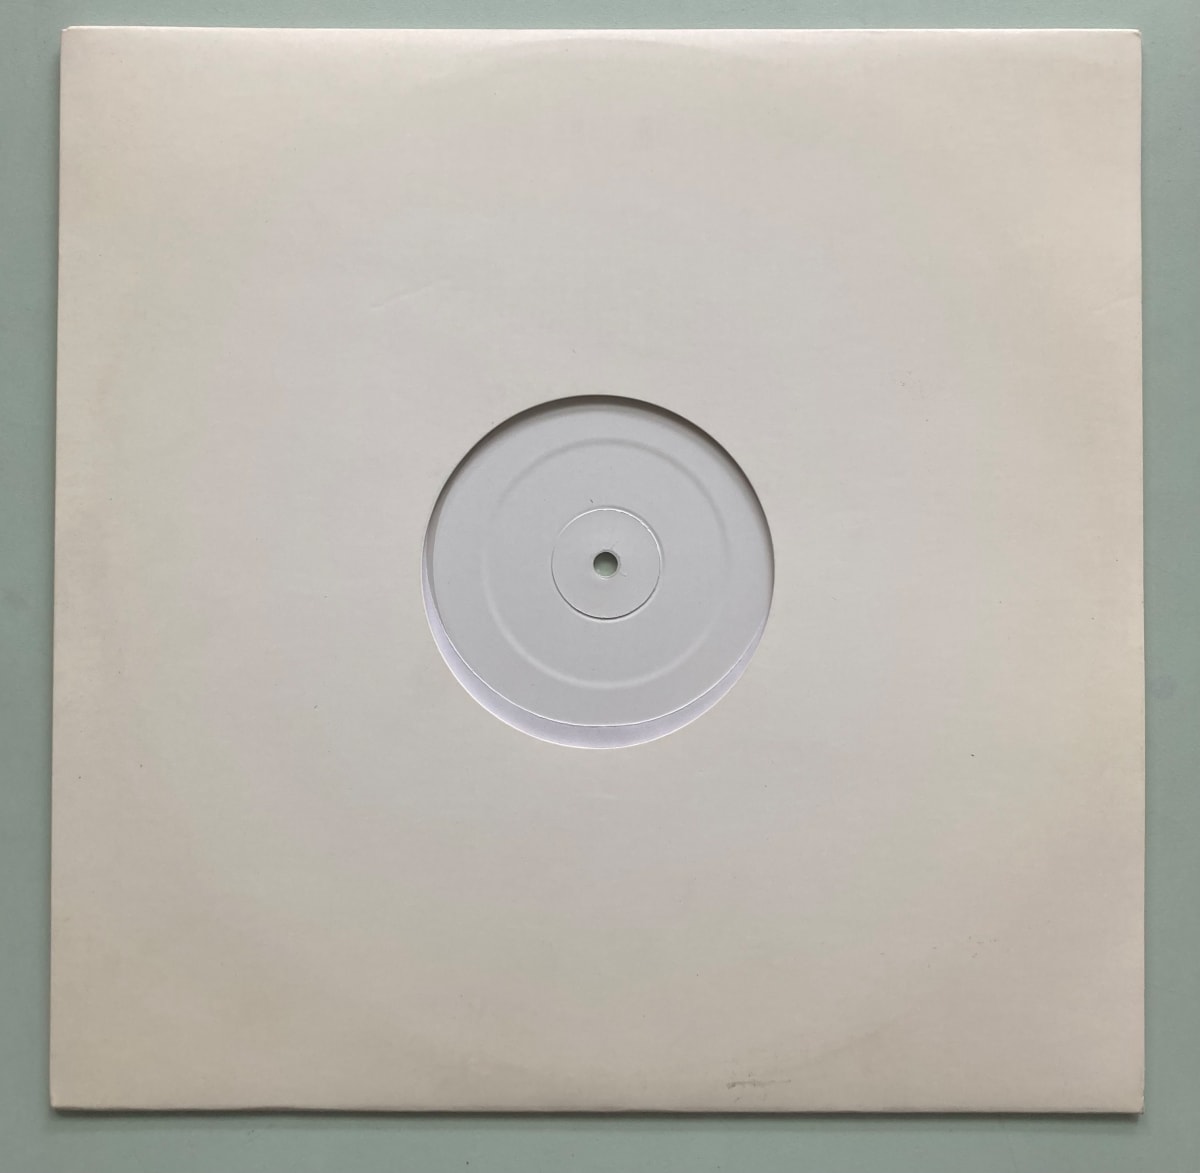 unmarked white vinyl record by misc. unknown 